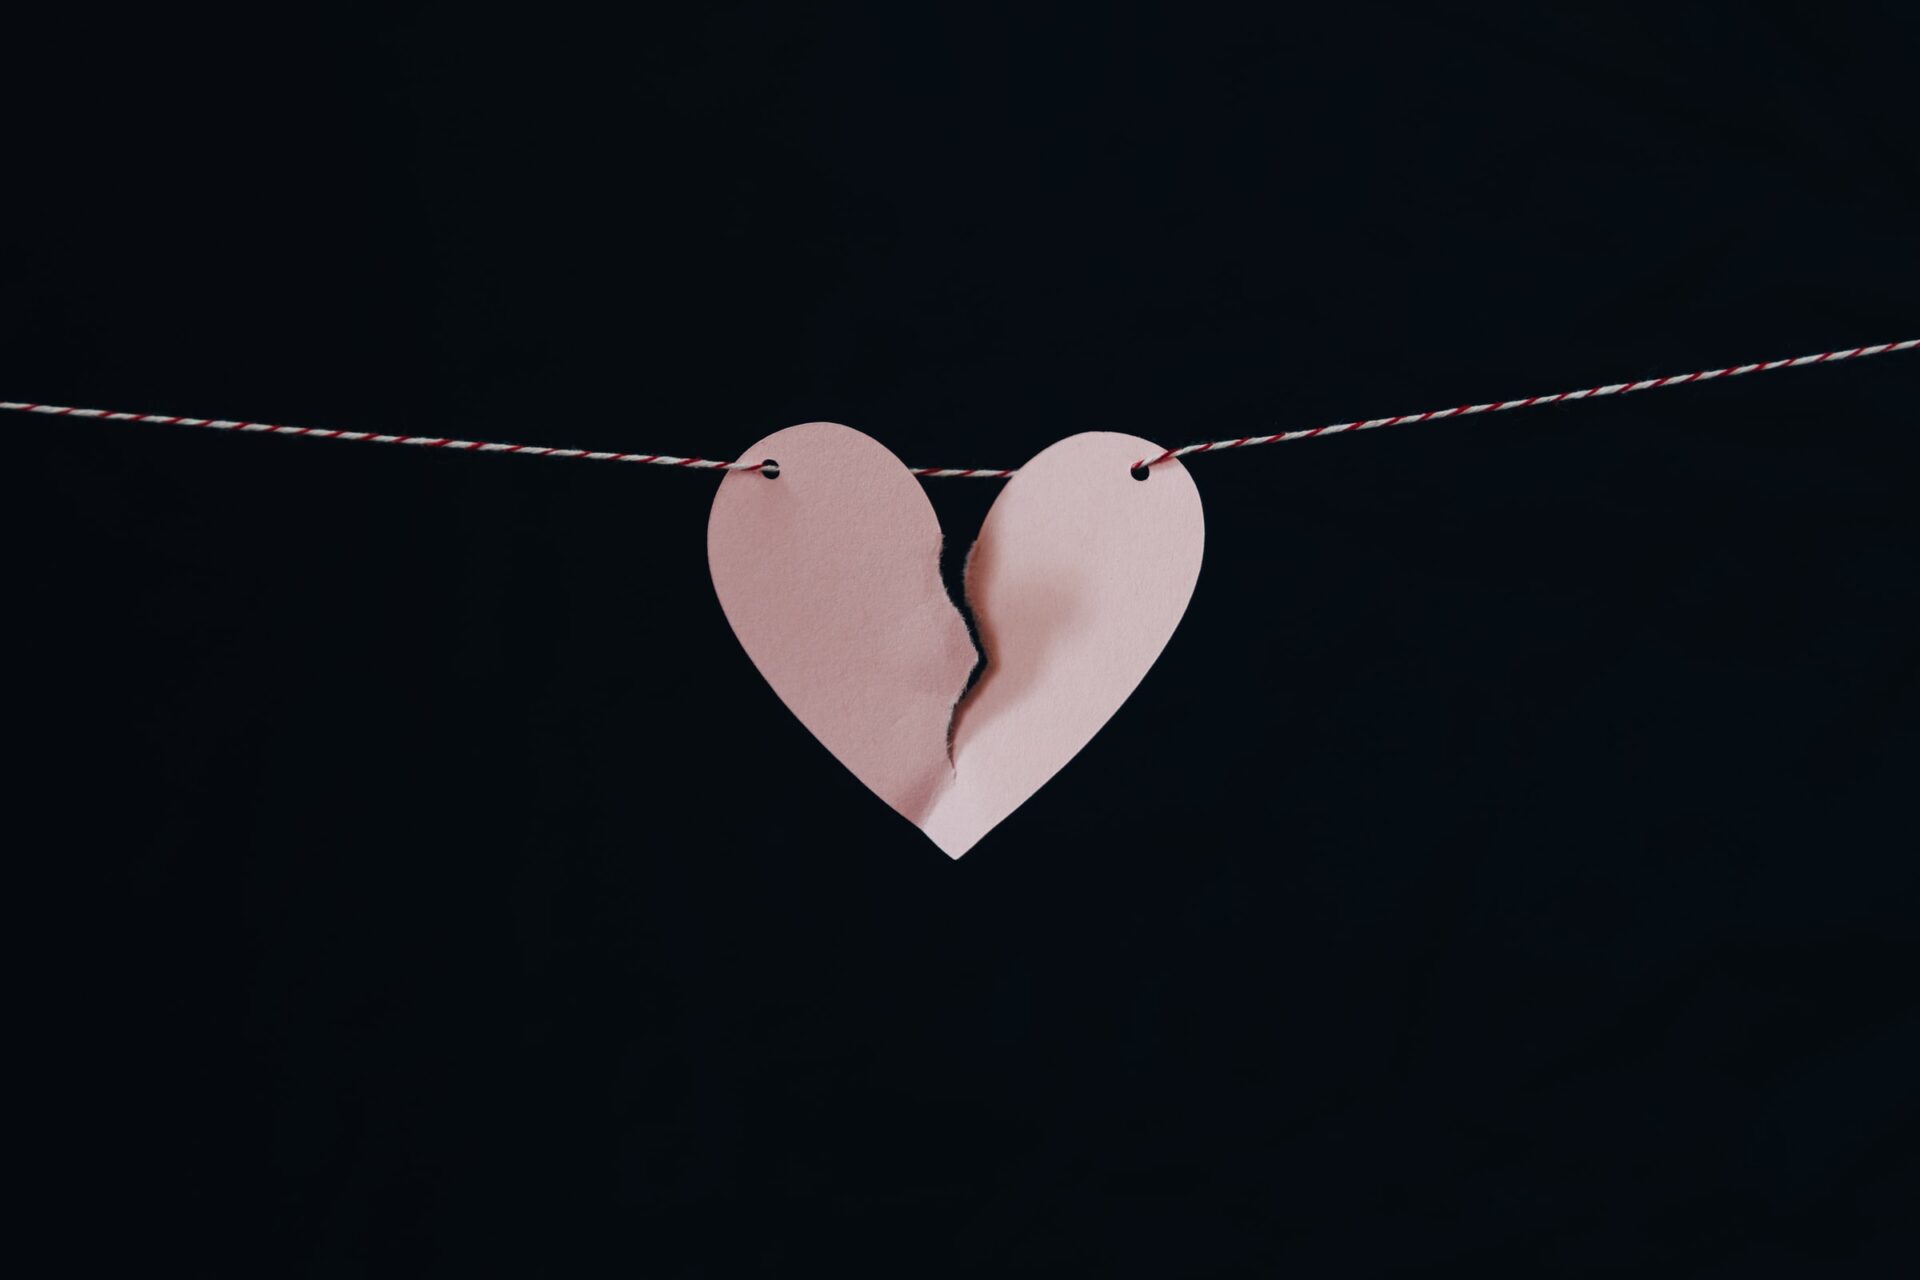 Hilariously portrays a broken heart on a string against a black background.